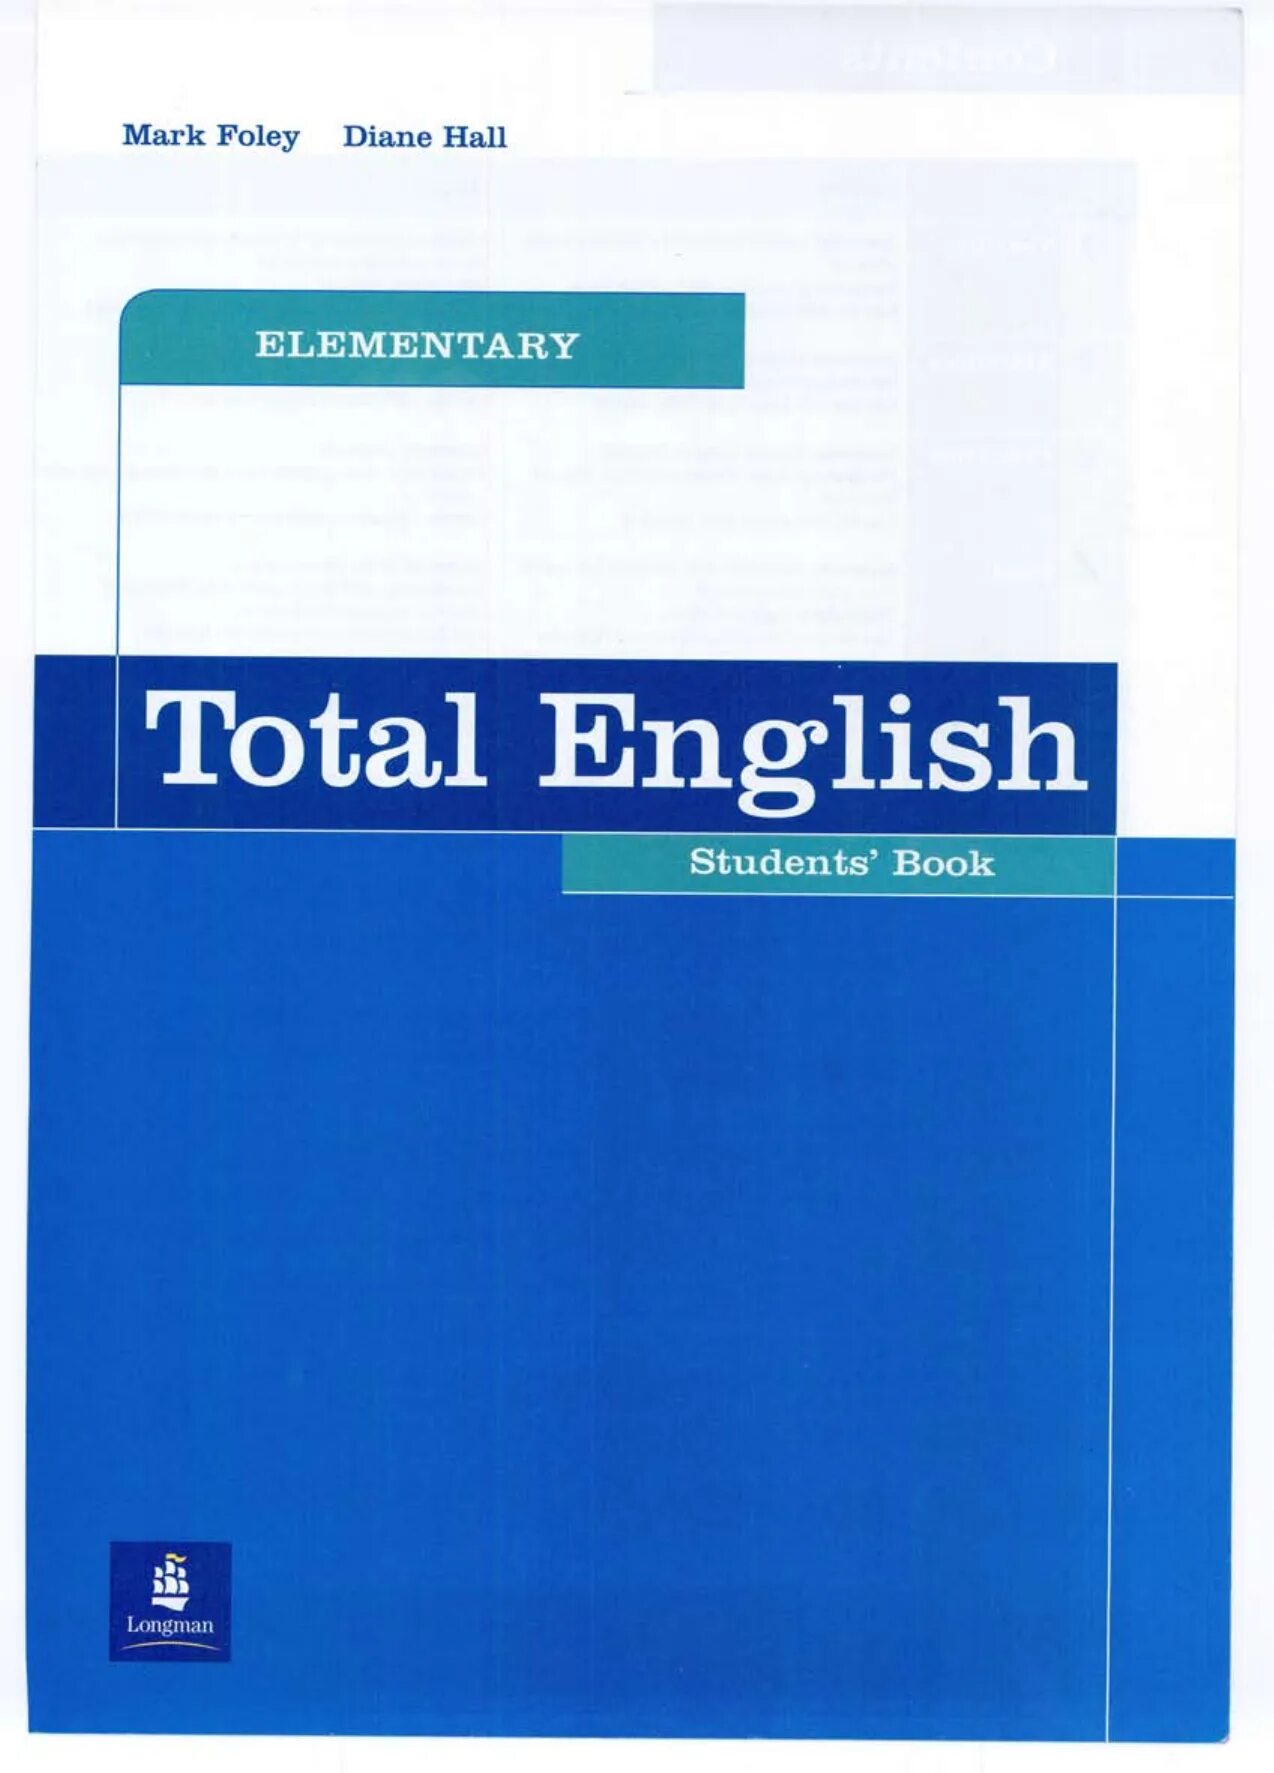 Total English Elementary. New total English, Longman. New total English Elementary. Total English Intermediate student's book. New total elementary